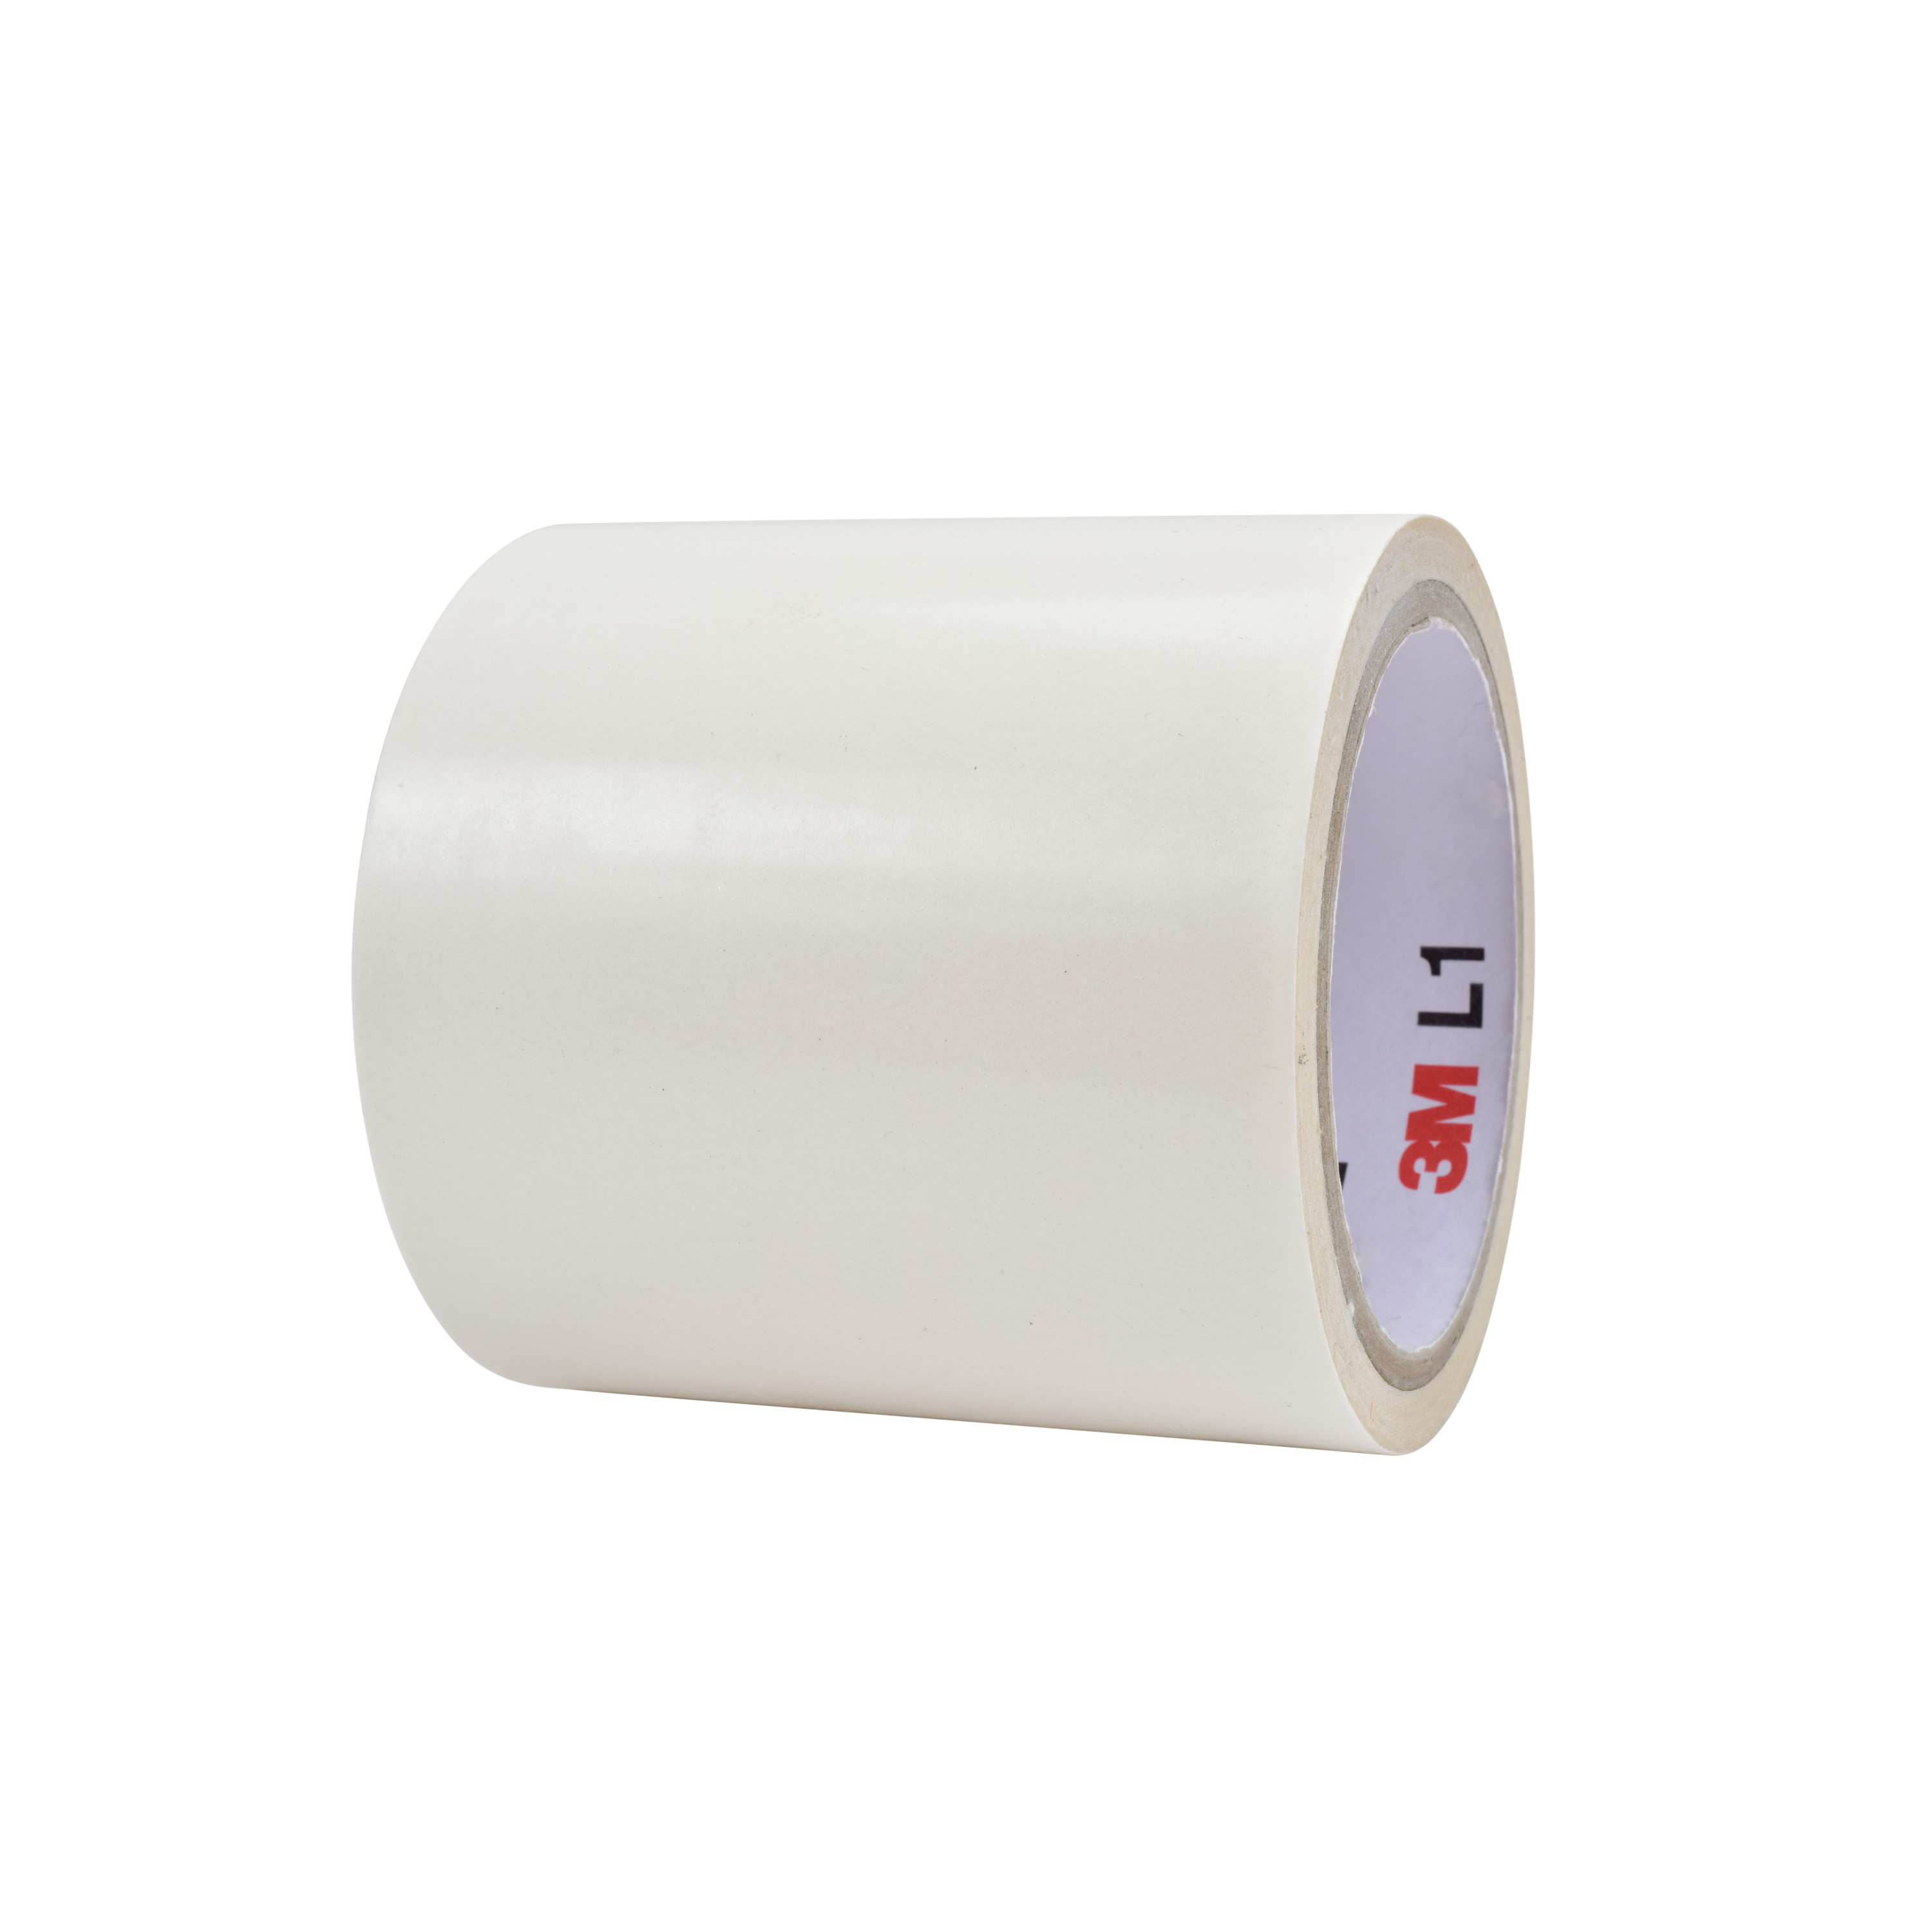 3M™ Double Coated Adhesive Tape L1+DCP, Clear, 1372 mm x 230 m, 3.5 mil,
6 rolls per pallet